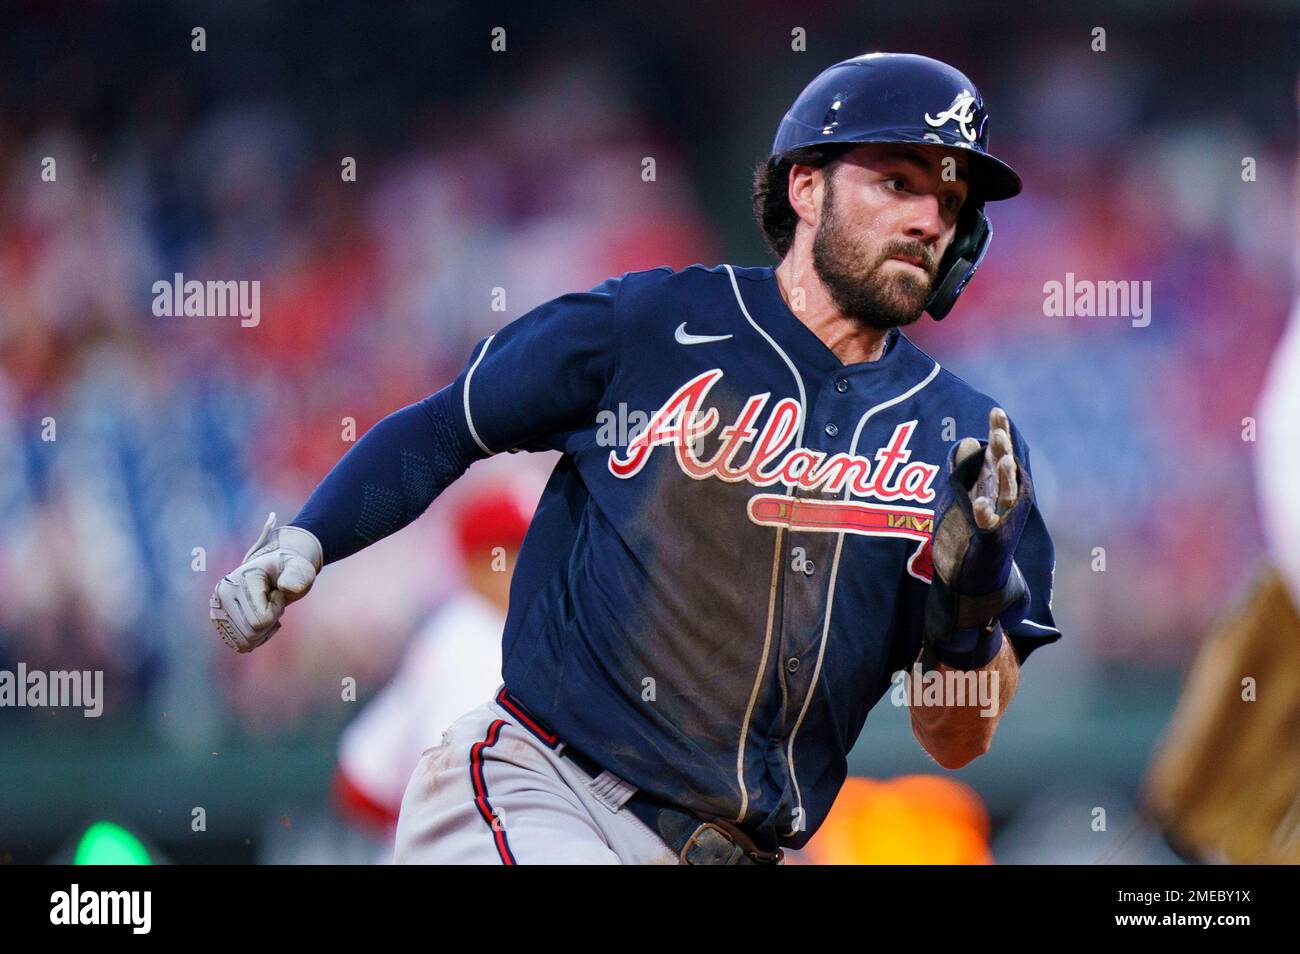 Dansby Swanson of the Atlanta Braves in action against the New